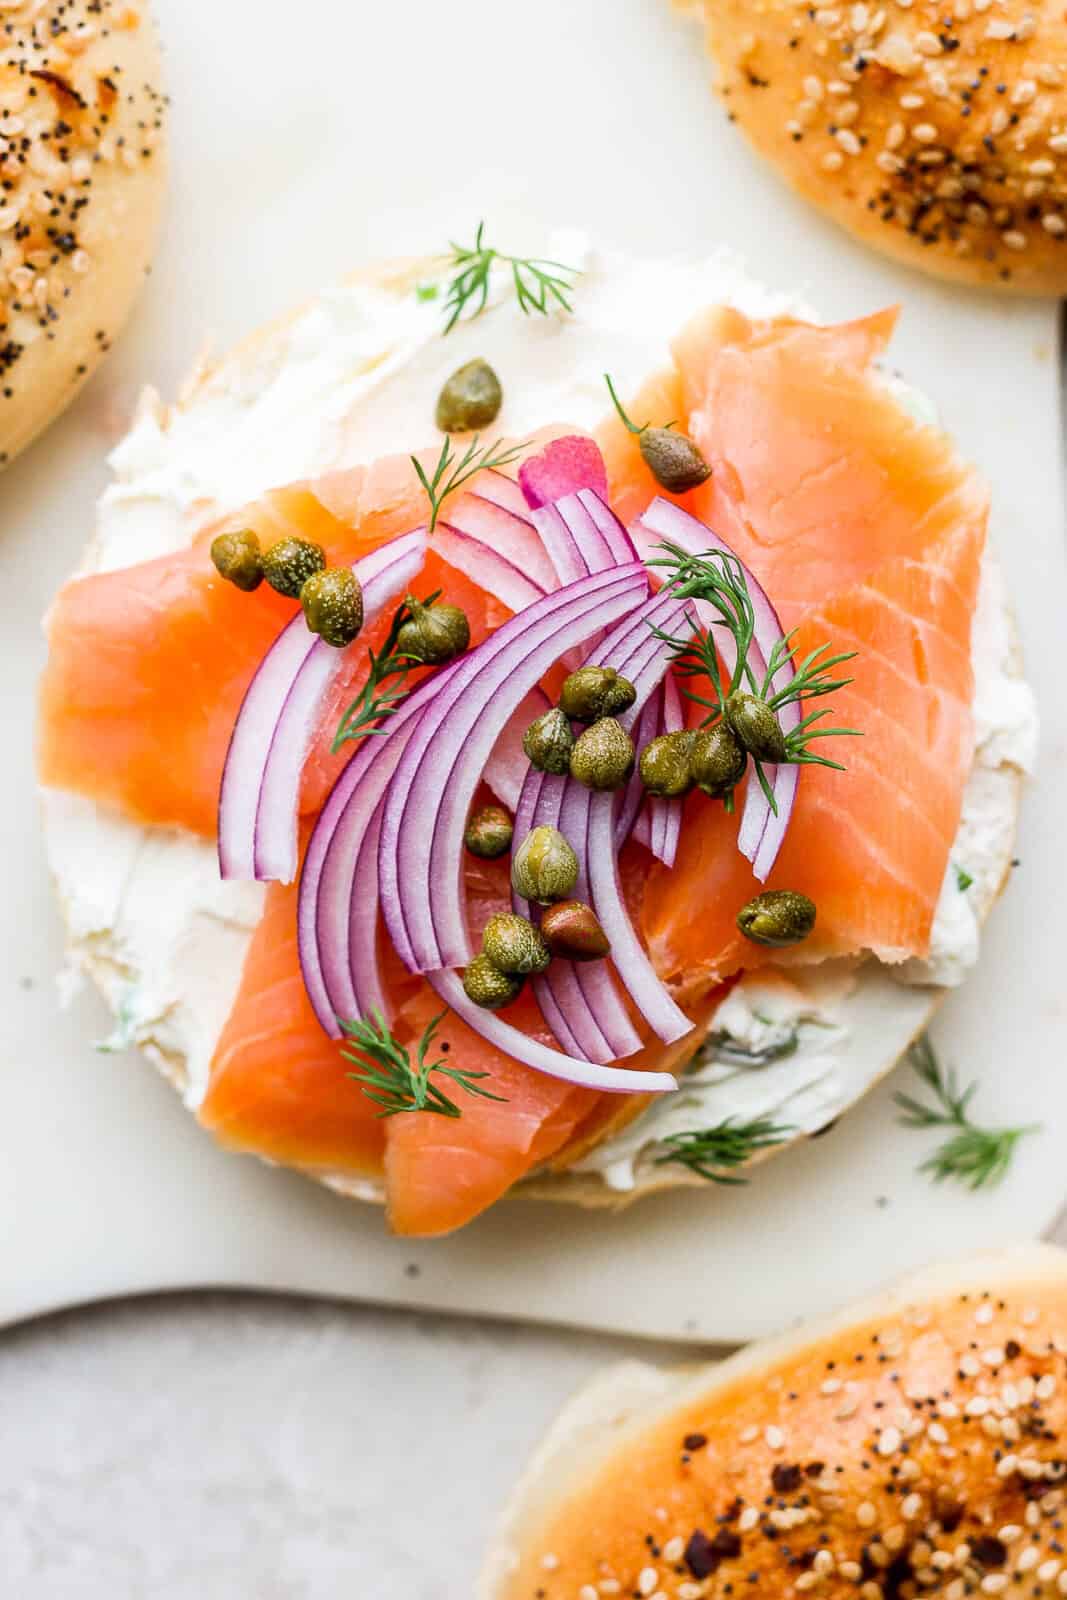 A lox bagel with all the toppings.